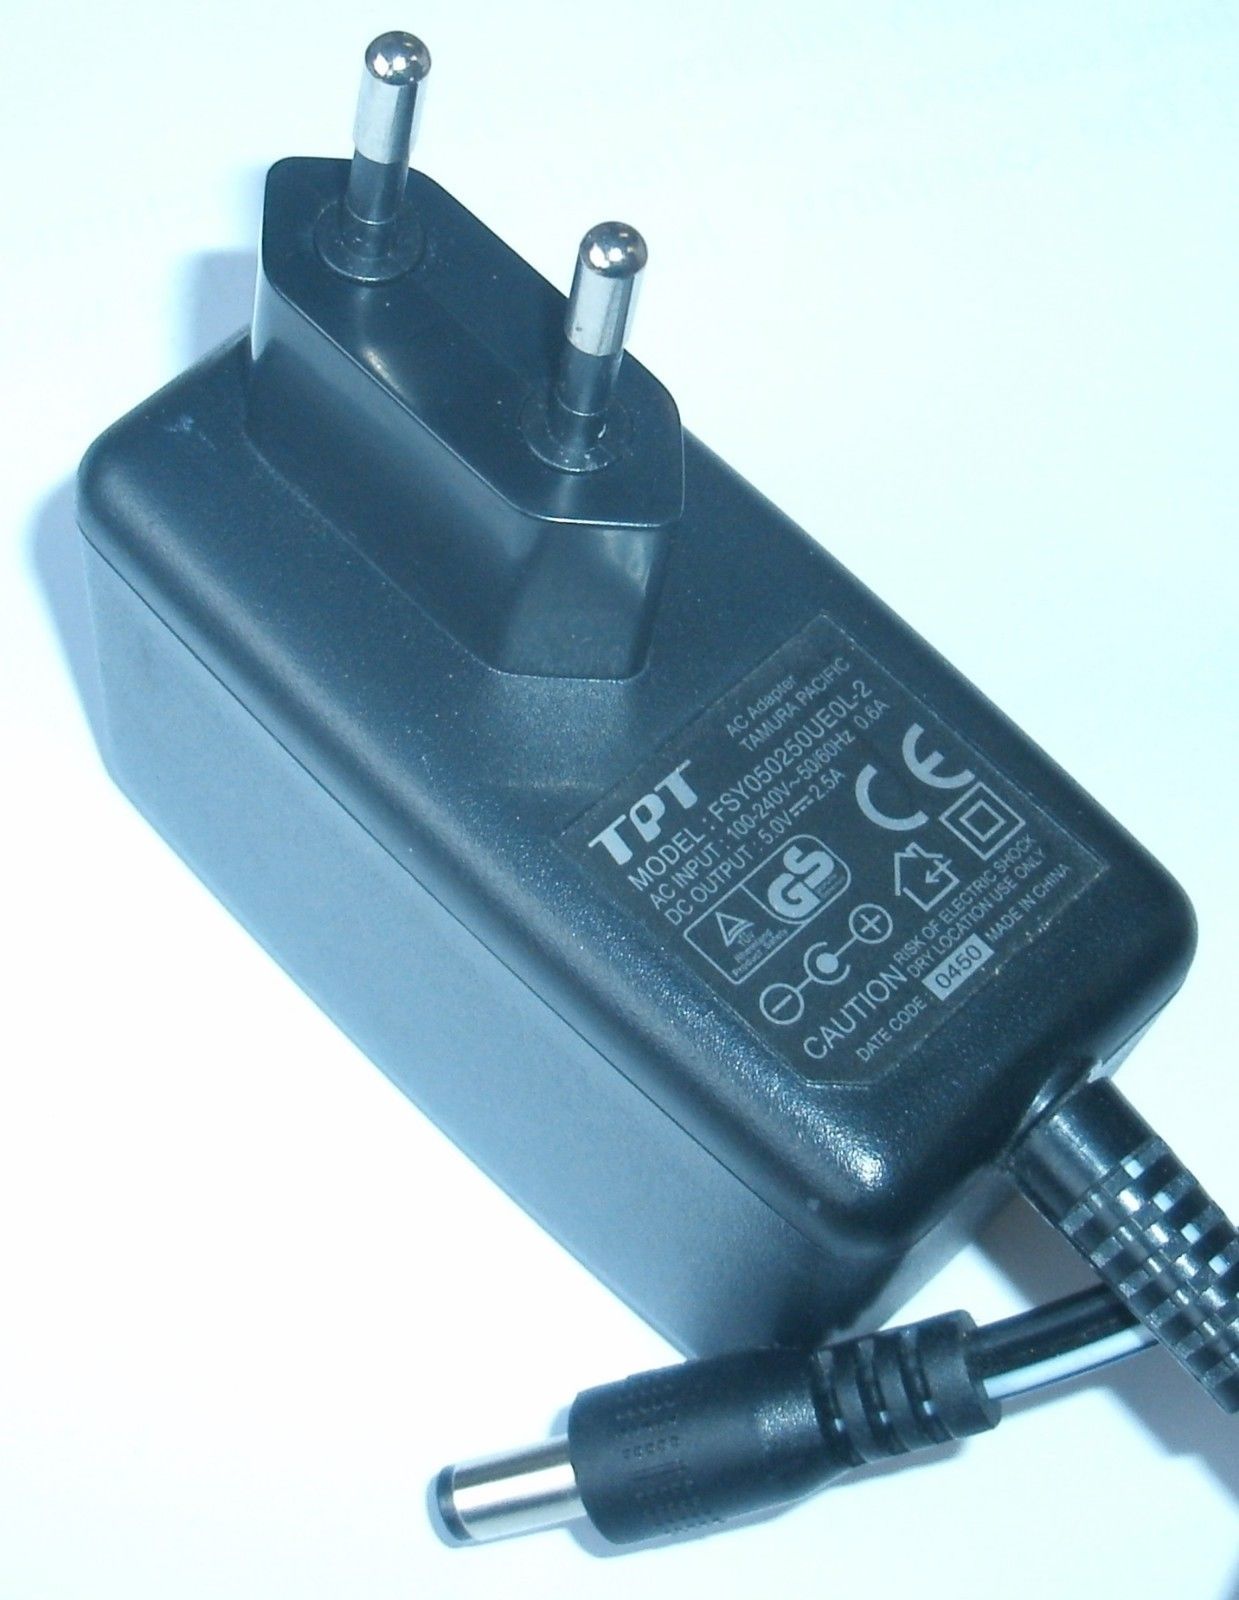 NEW 5V 2.5A TPT FSY050250UE0L-2 Power Supply Charger AC ADAPTER